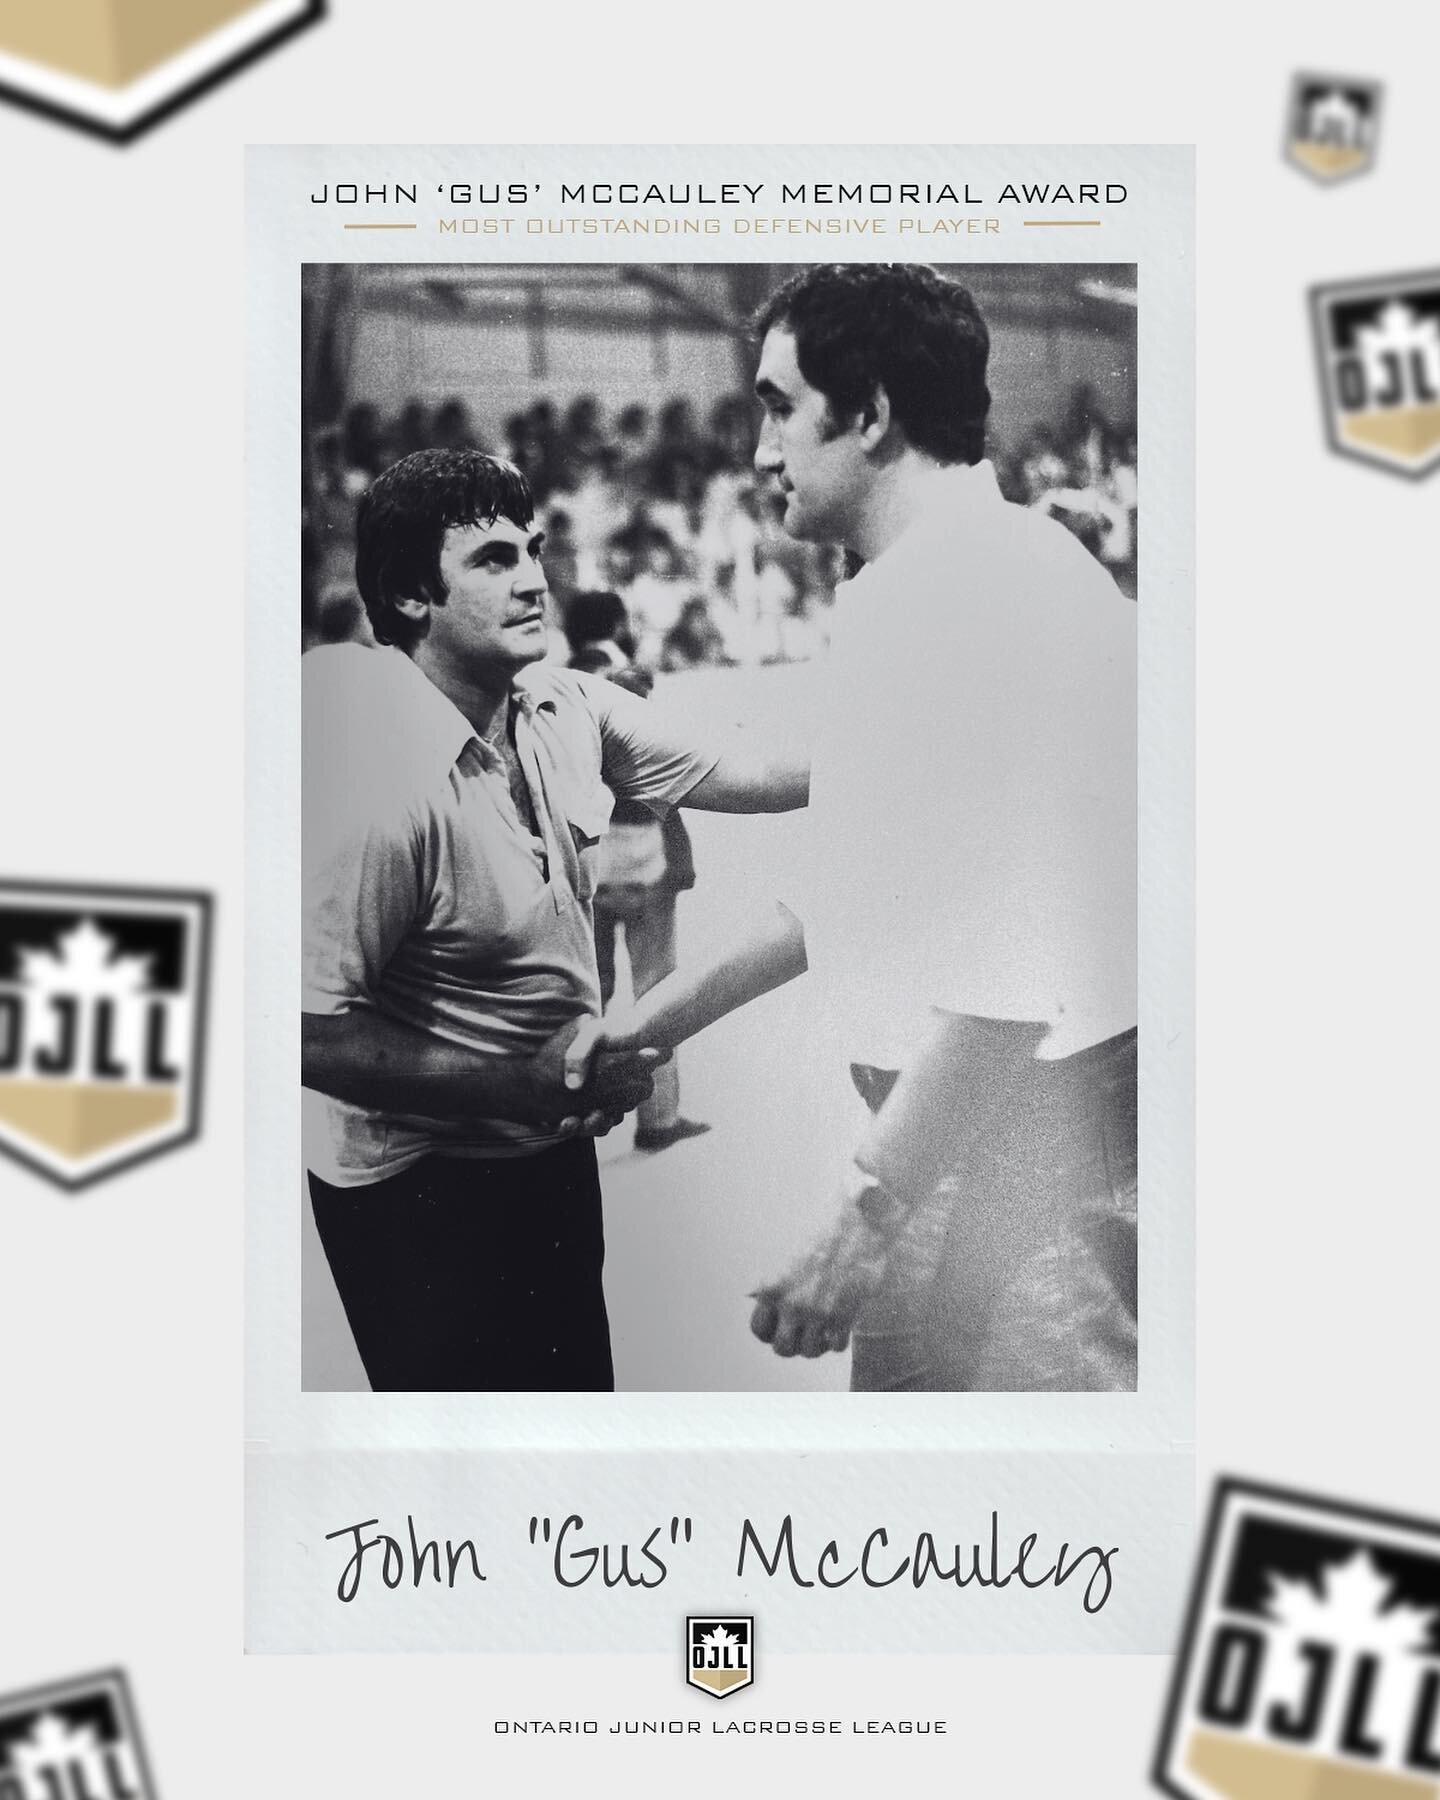 The Most Outstanding Defensive Player Award honours the legendary John &ldquo;Gus&rdquo; McCauley. 

In 1959, McCauley helped the Brampton Excelsiors win their third consecutive national championship and became the youngest player (14) to win the Min